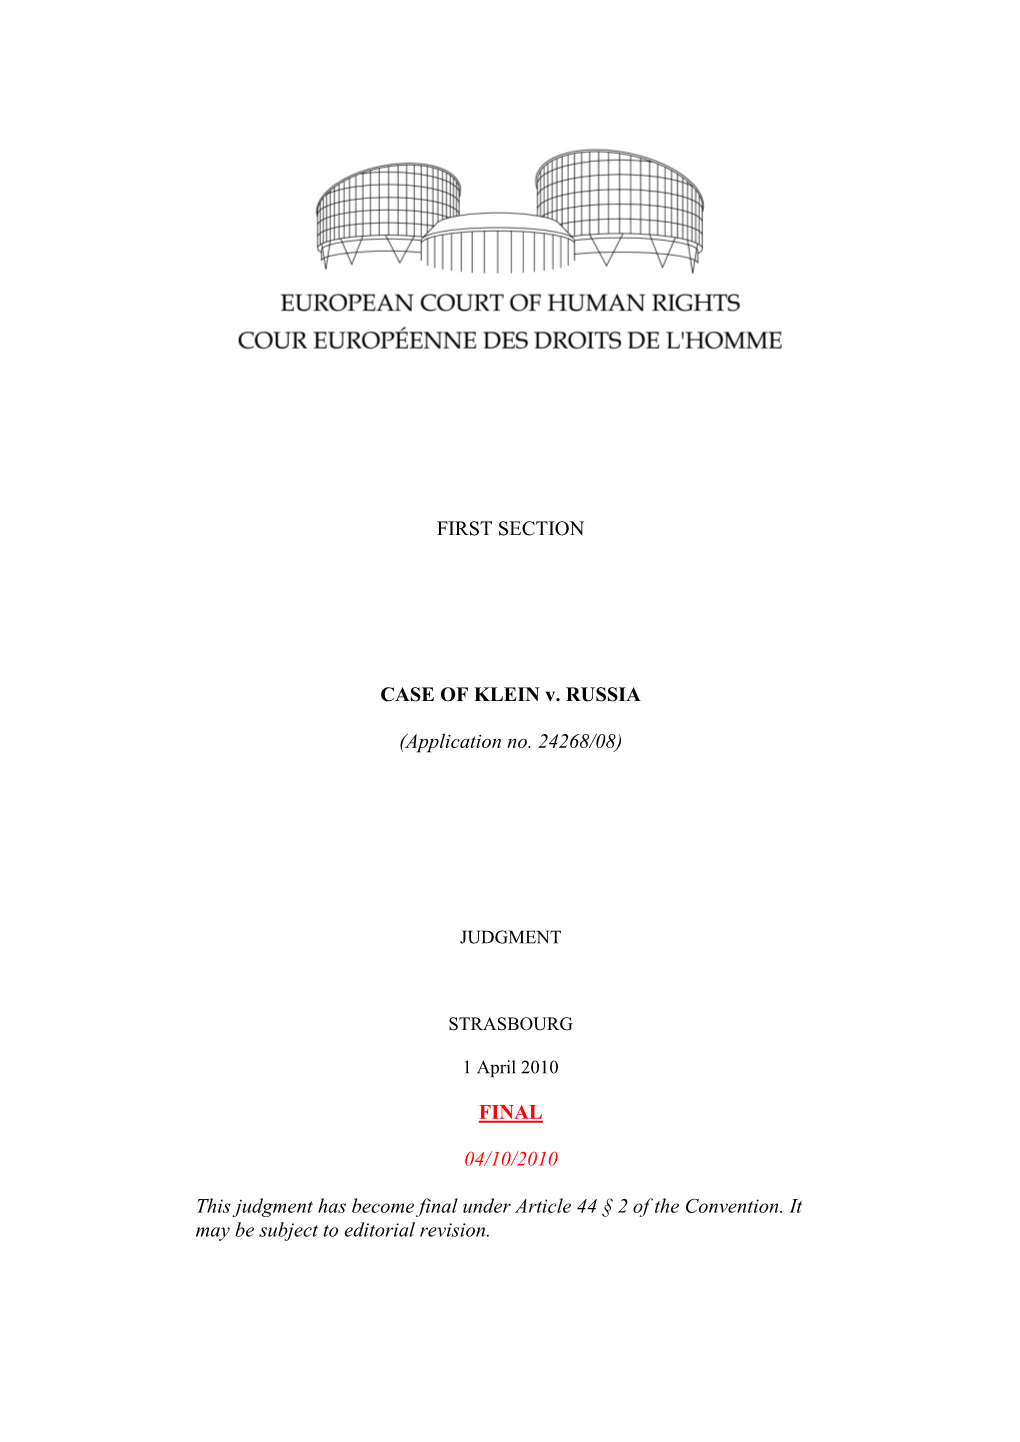 FIRST SECTION CASE of KLEIN V. RUSSIA